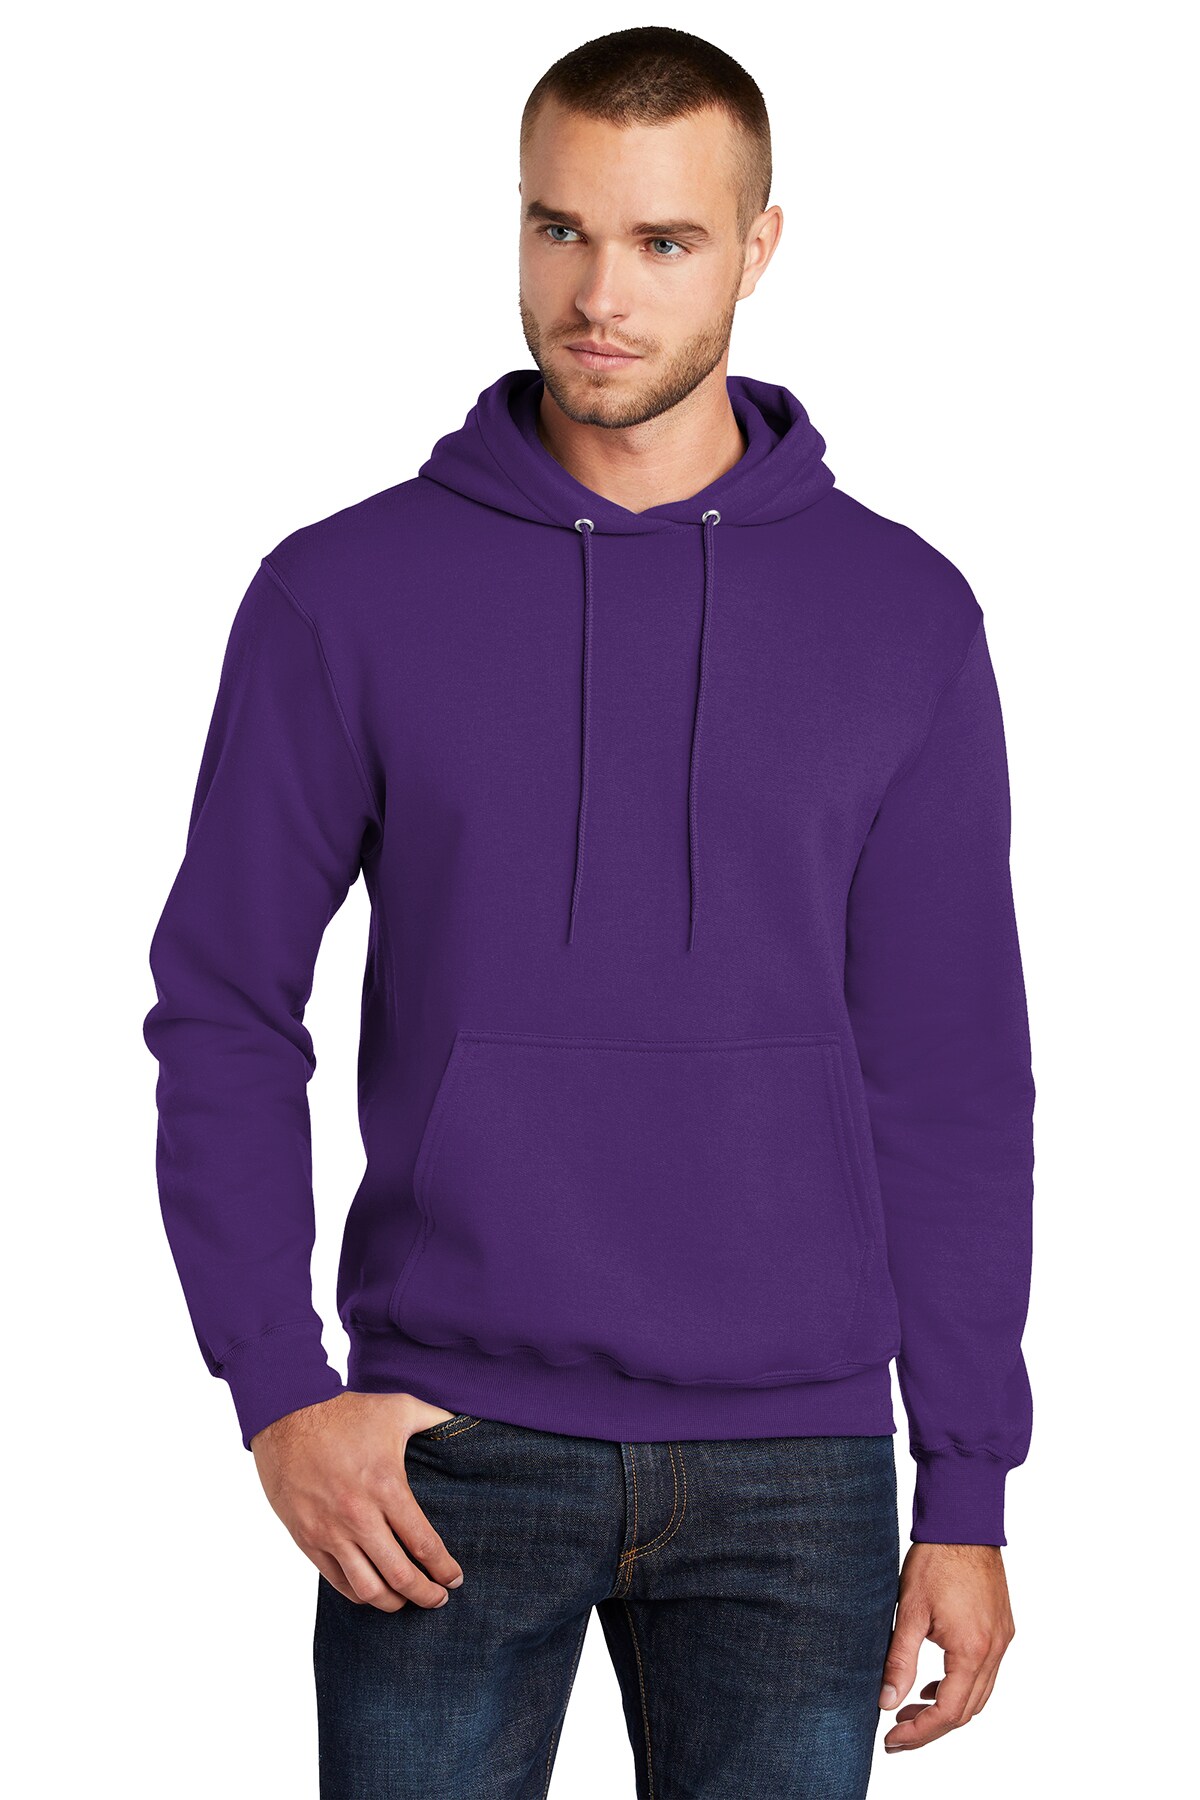 Men's Fleece Pullover Hooded Hoodie, Sweatshirt is a popular and  comfortable choice for casual wear With softness and warmth felling |  RADYAN®